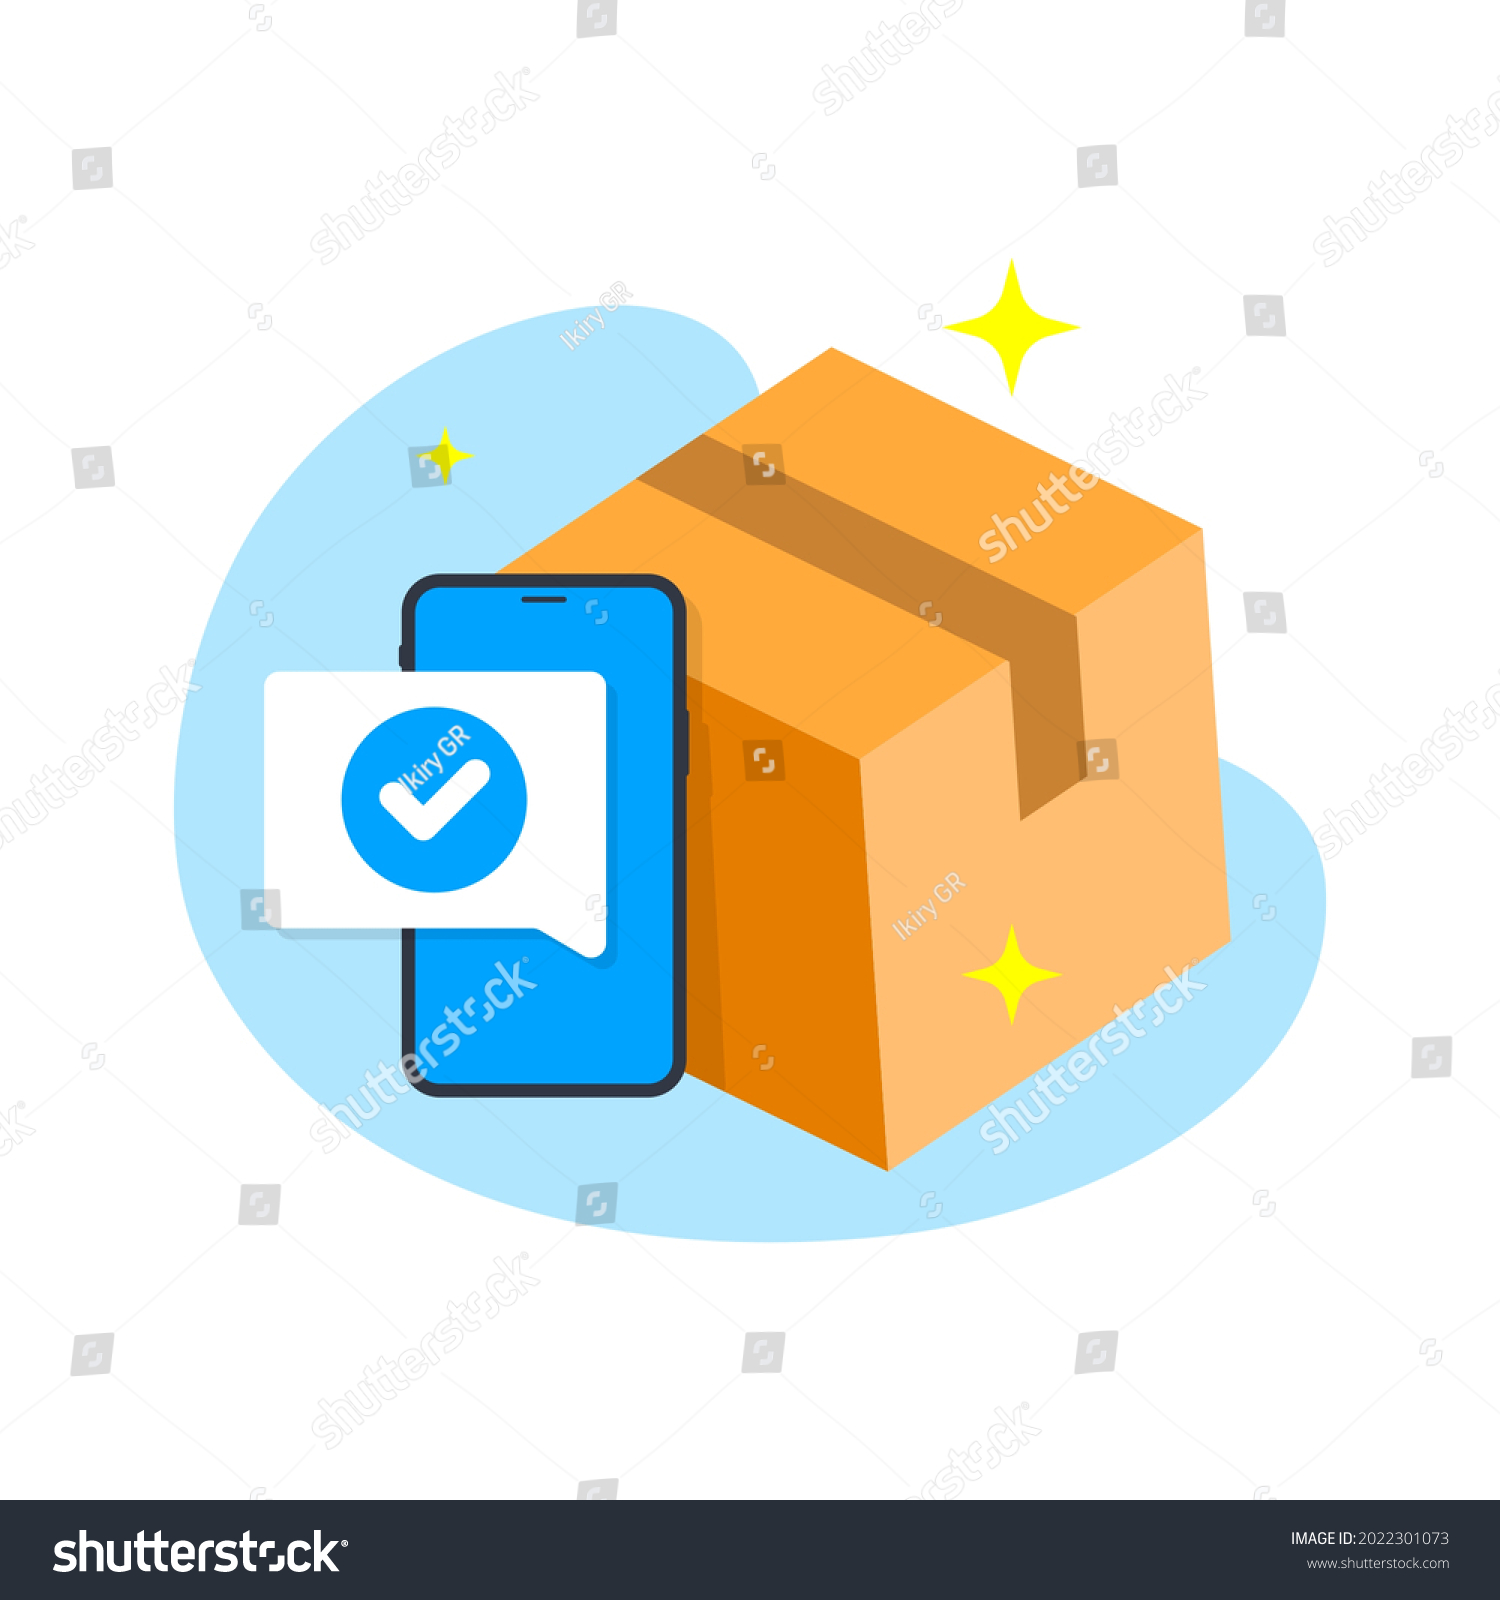 SVG of done, process completed, order package has arrived with smartphone notification concept illustration flat design vector eps10. modern graphic element for landing page, empty state ui, infographic svg